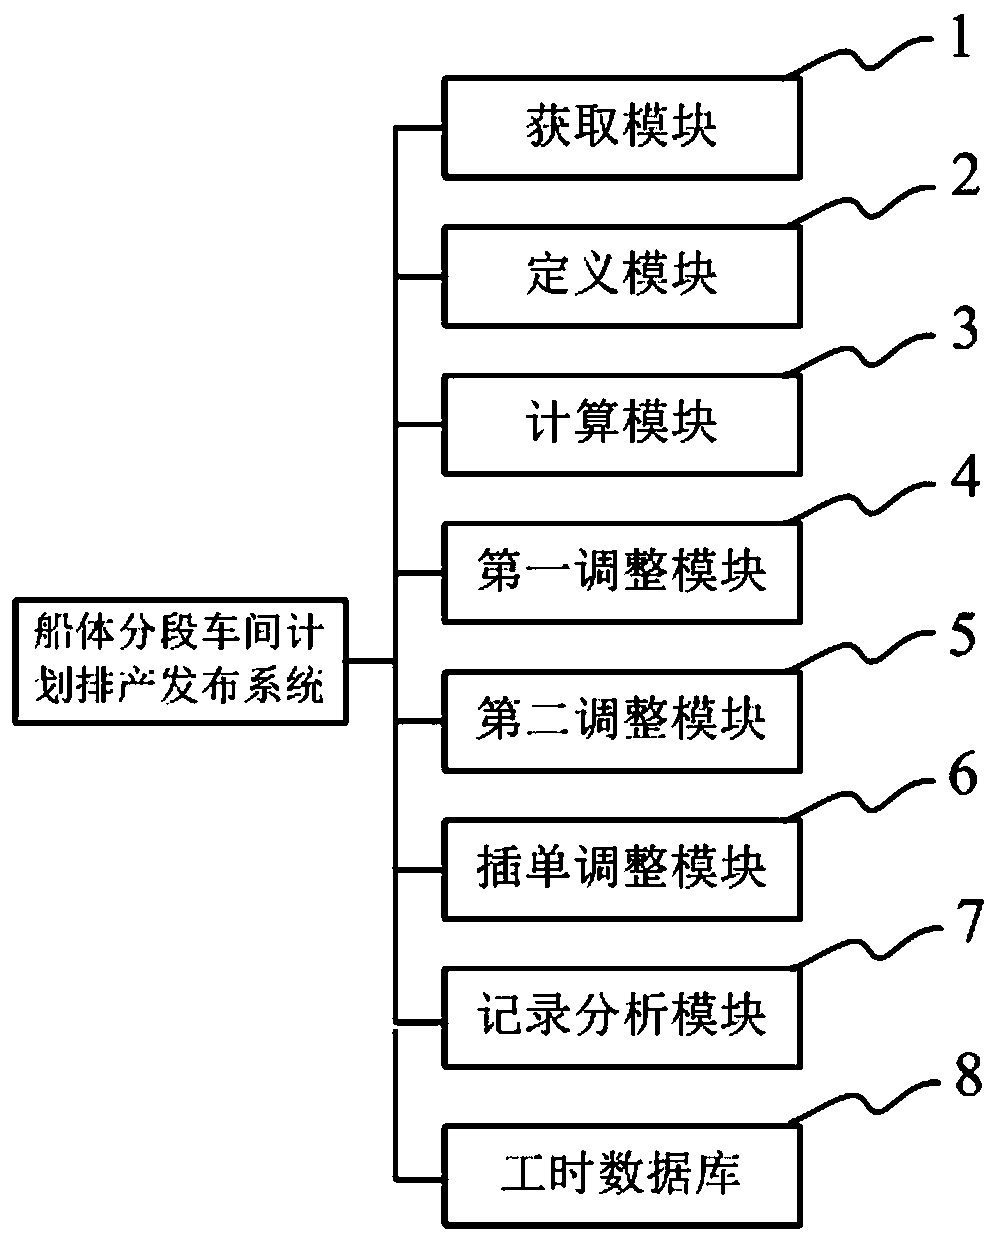 Object-oriented ship body segment workshop plan scheduling and publishing method and system